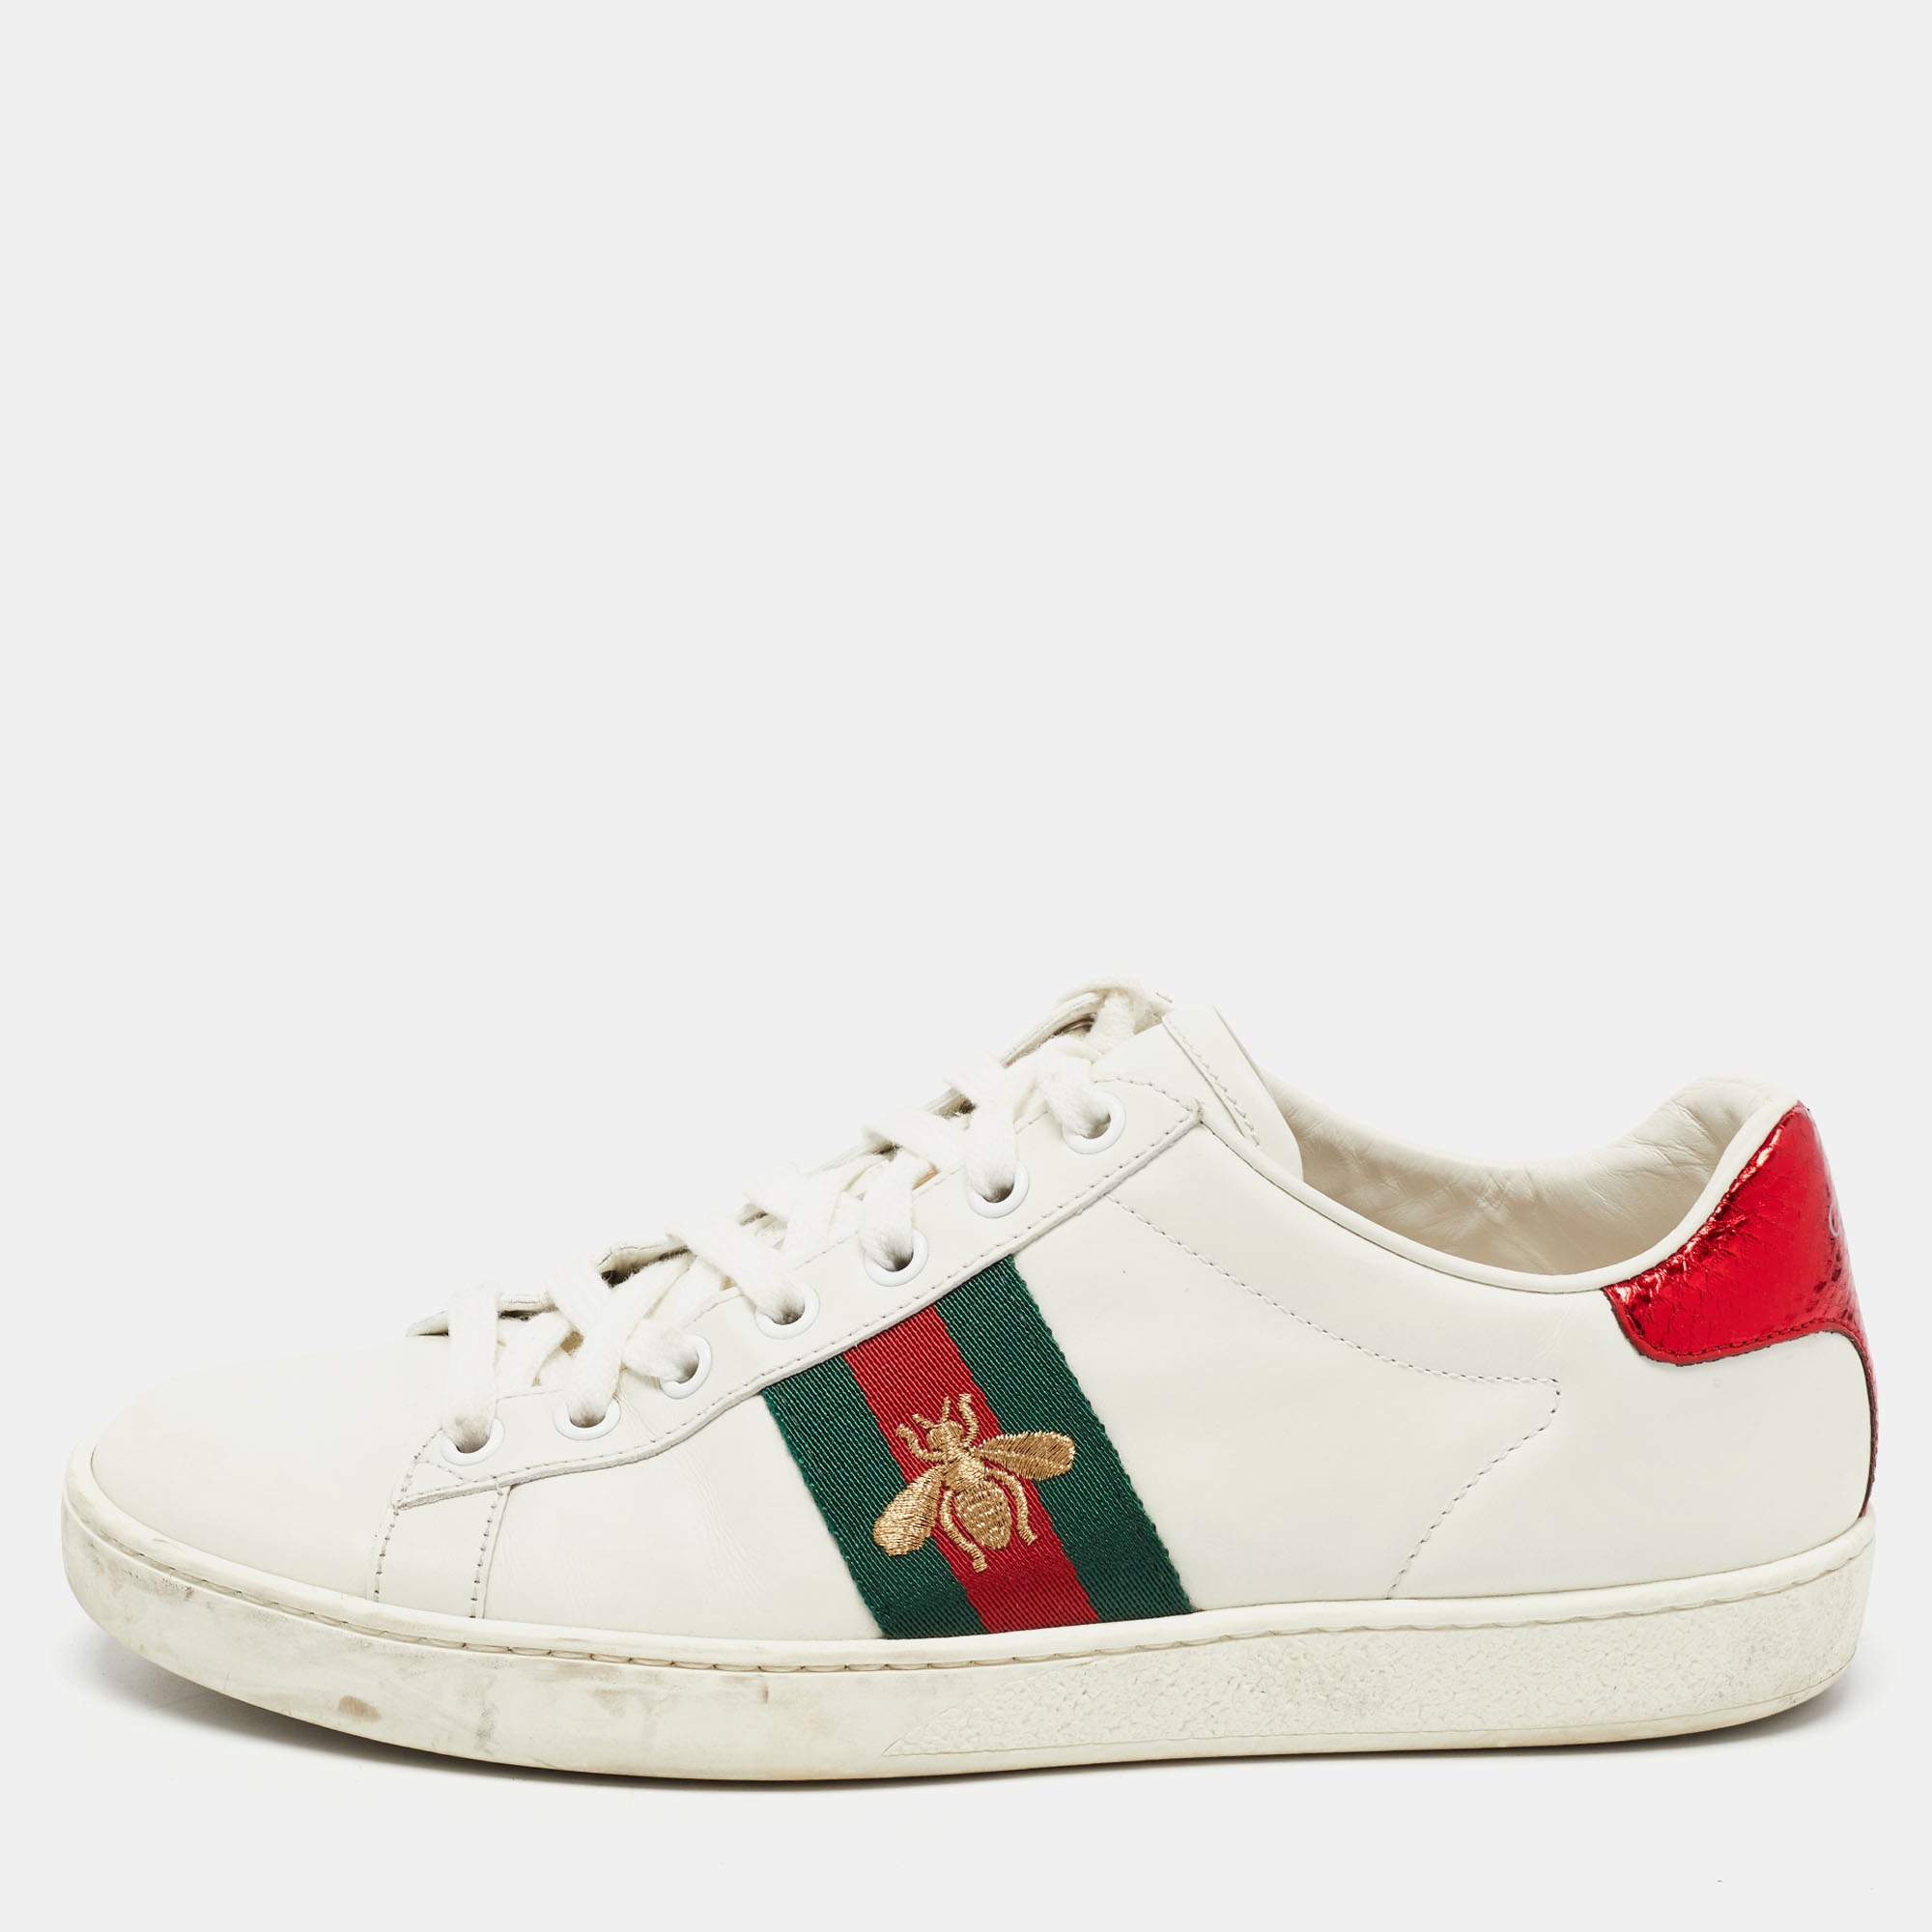 Pre-owned Gucci White Leather Web Ace Bee Embroidered Sneakers Size 37.5